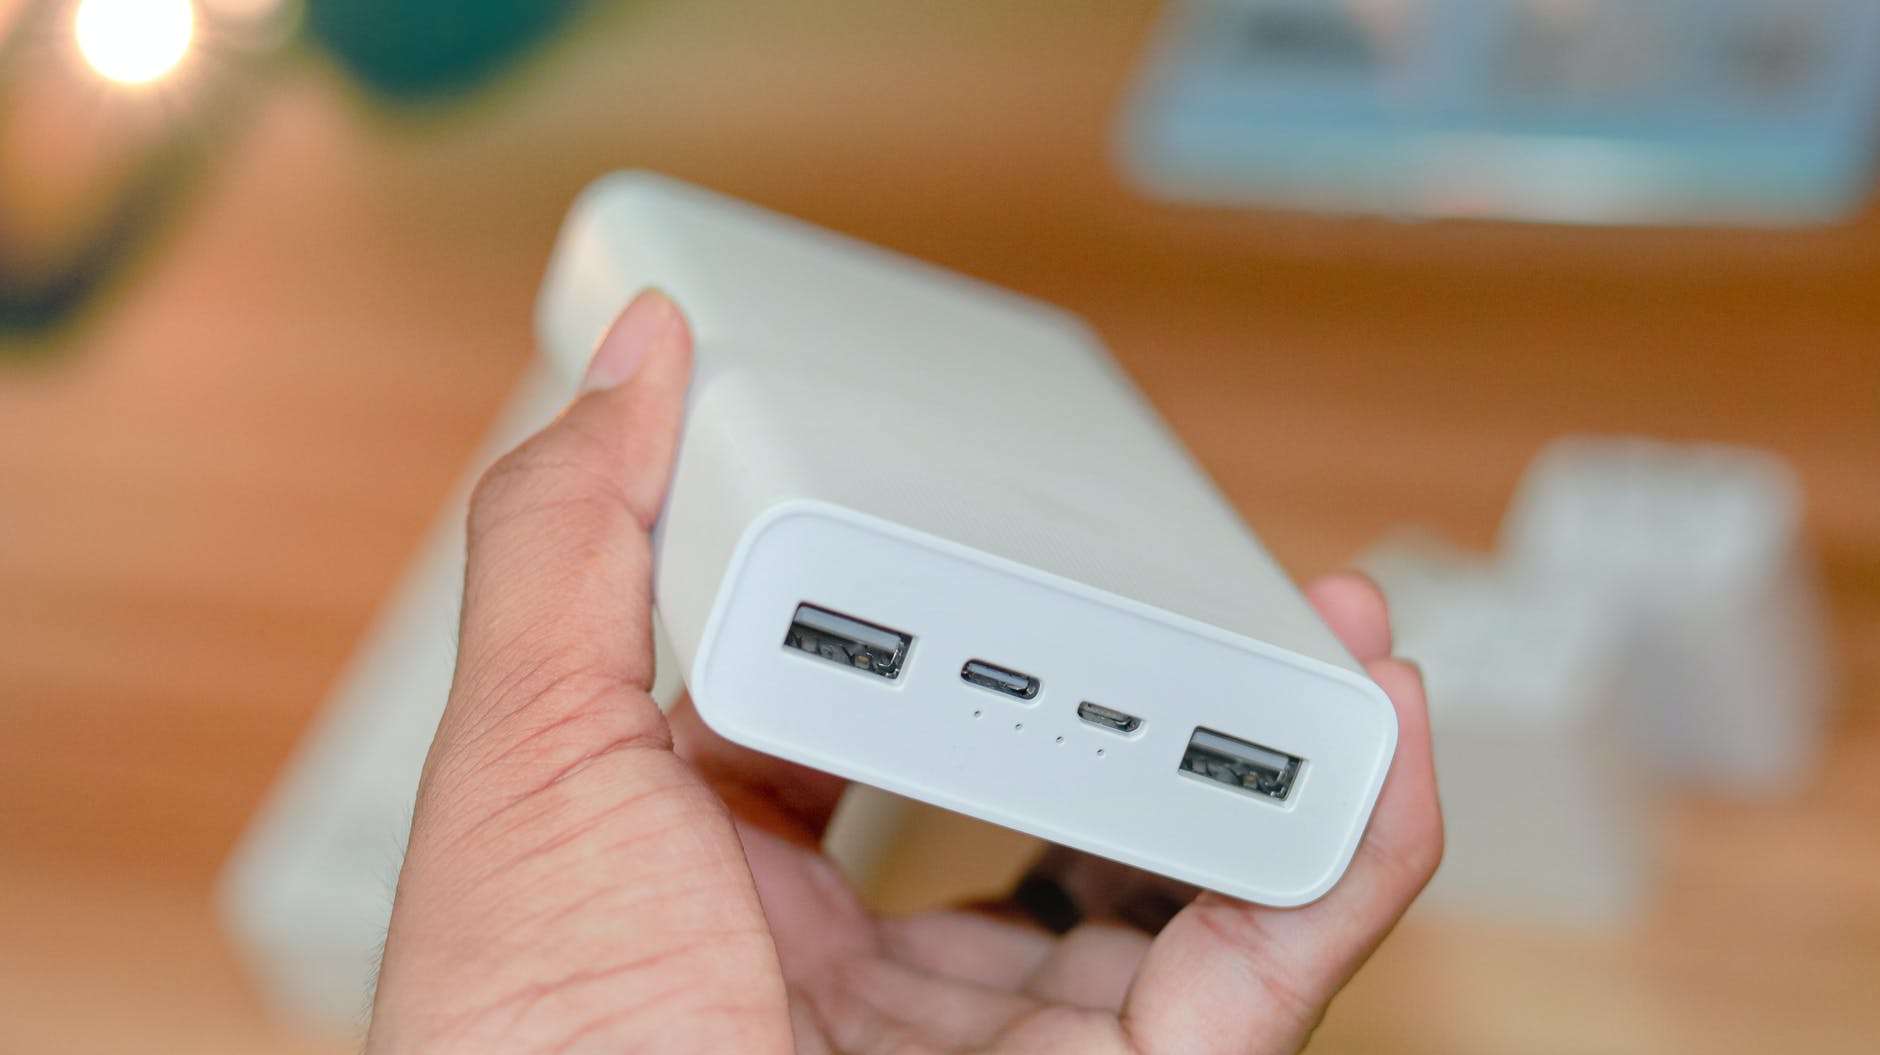 Handiest Power Banks with around 15000mah Battery To Boost Your Mobile Phones | Most Searched Products - Times of India